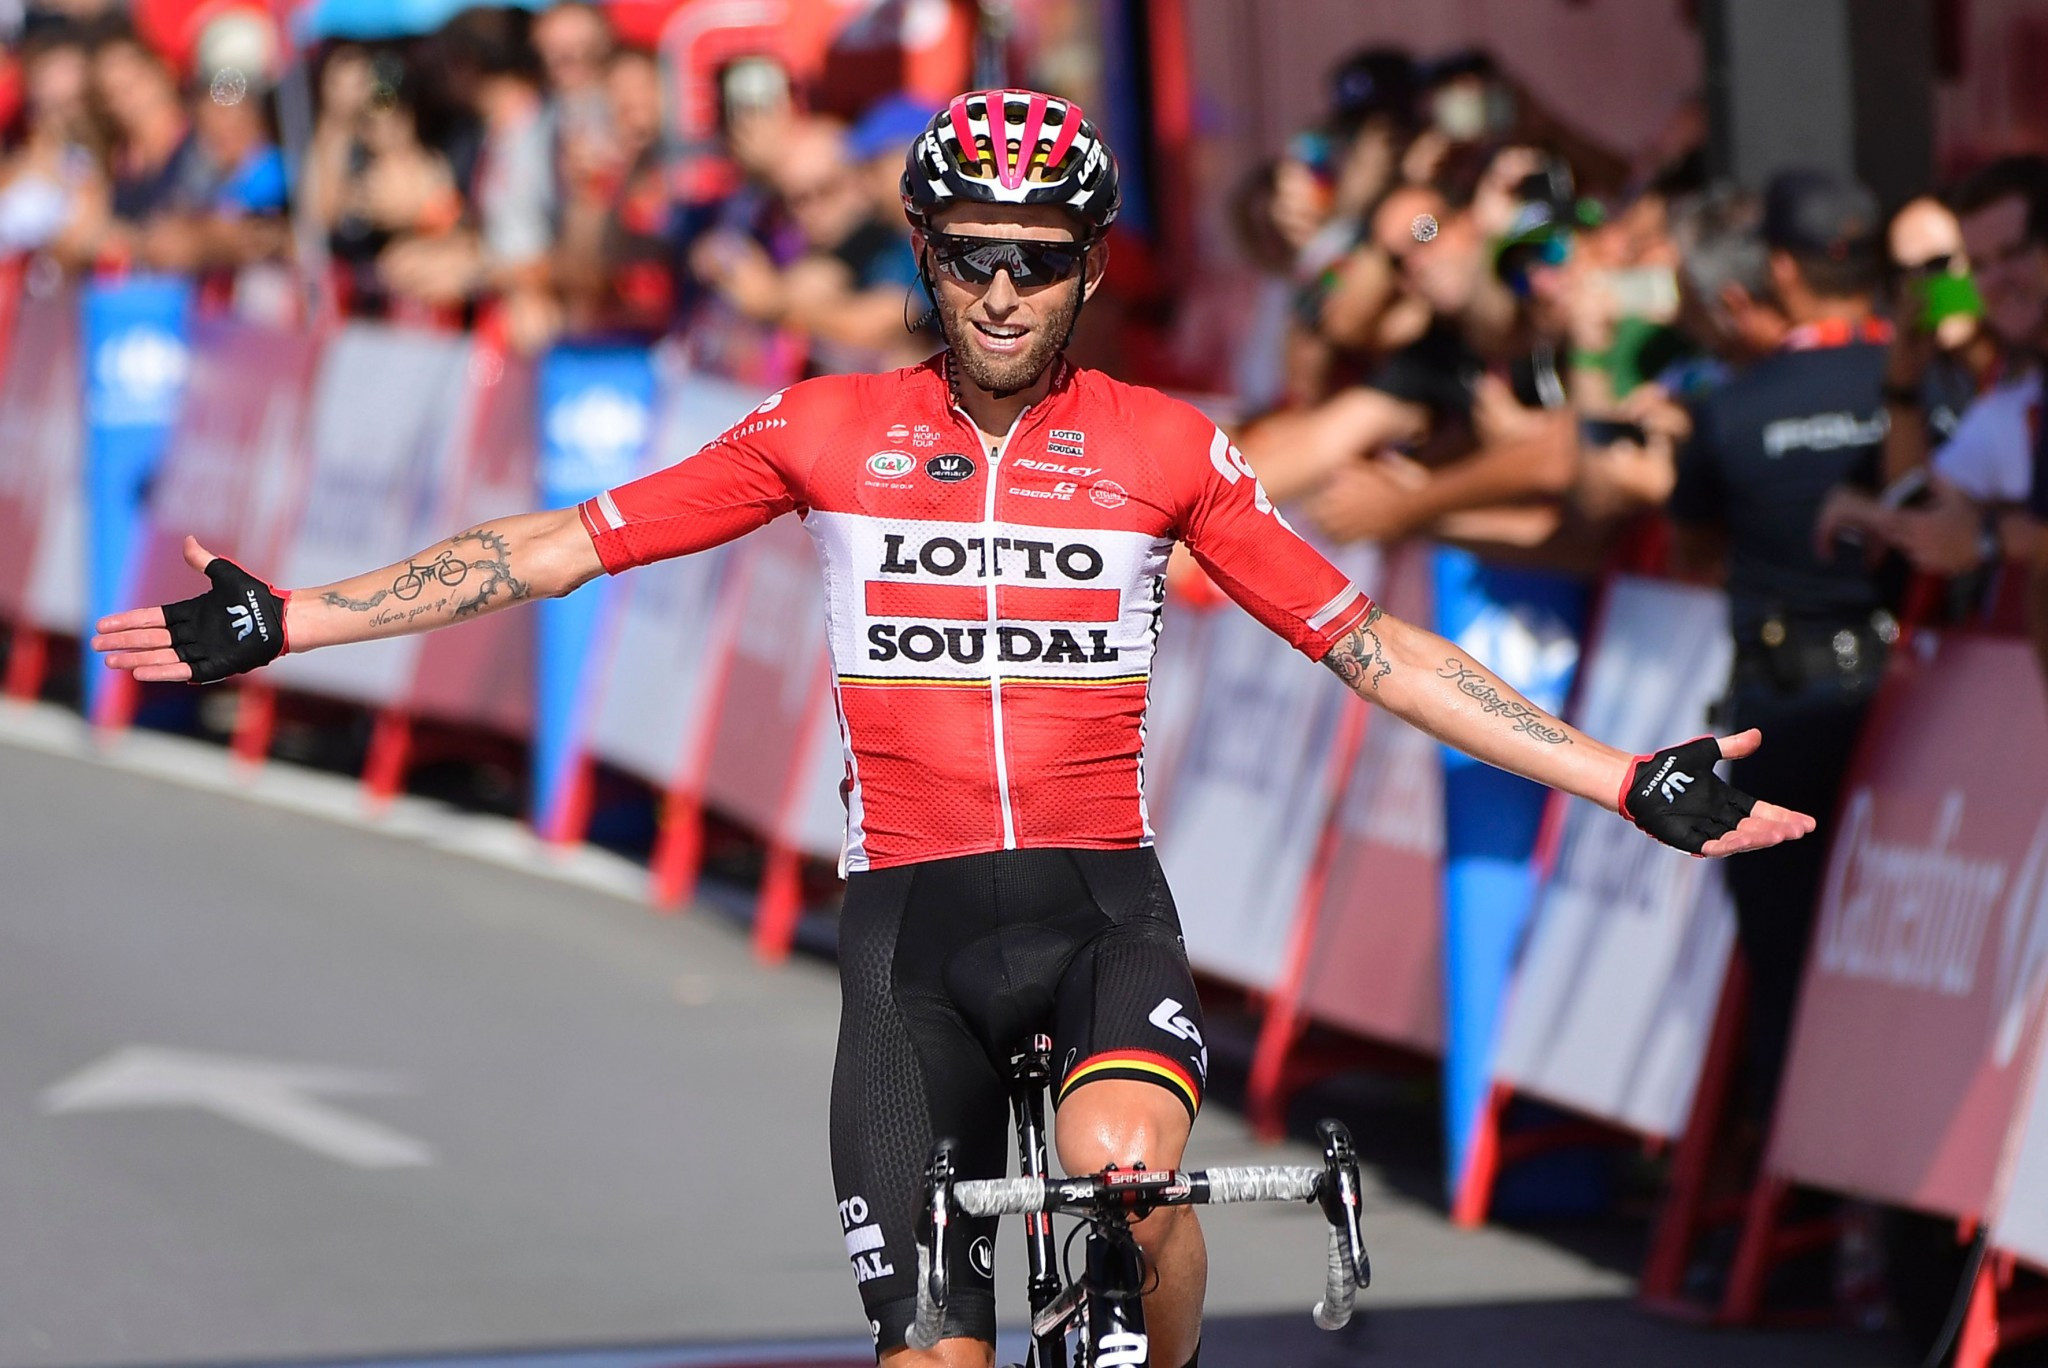 Marczynski claims stage 12 win at Vuelta a España as Froome's overall lead reduced